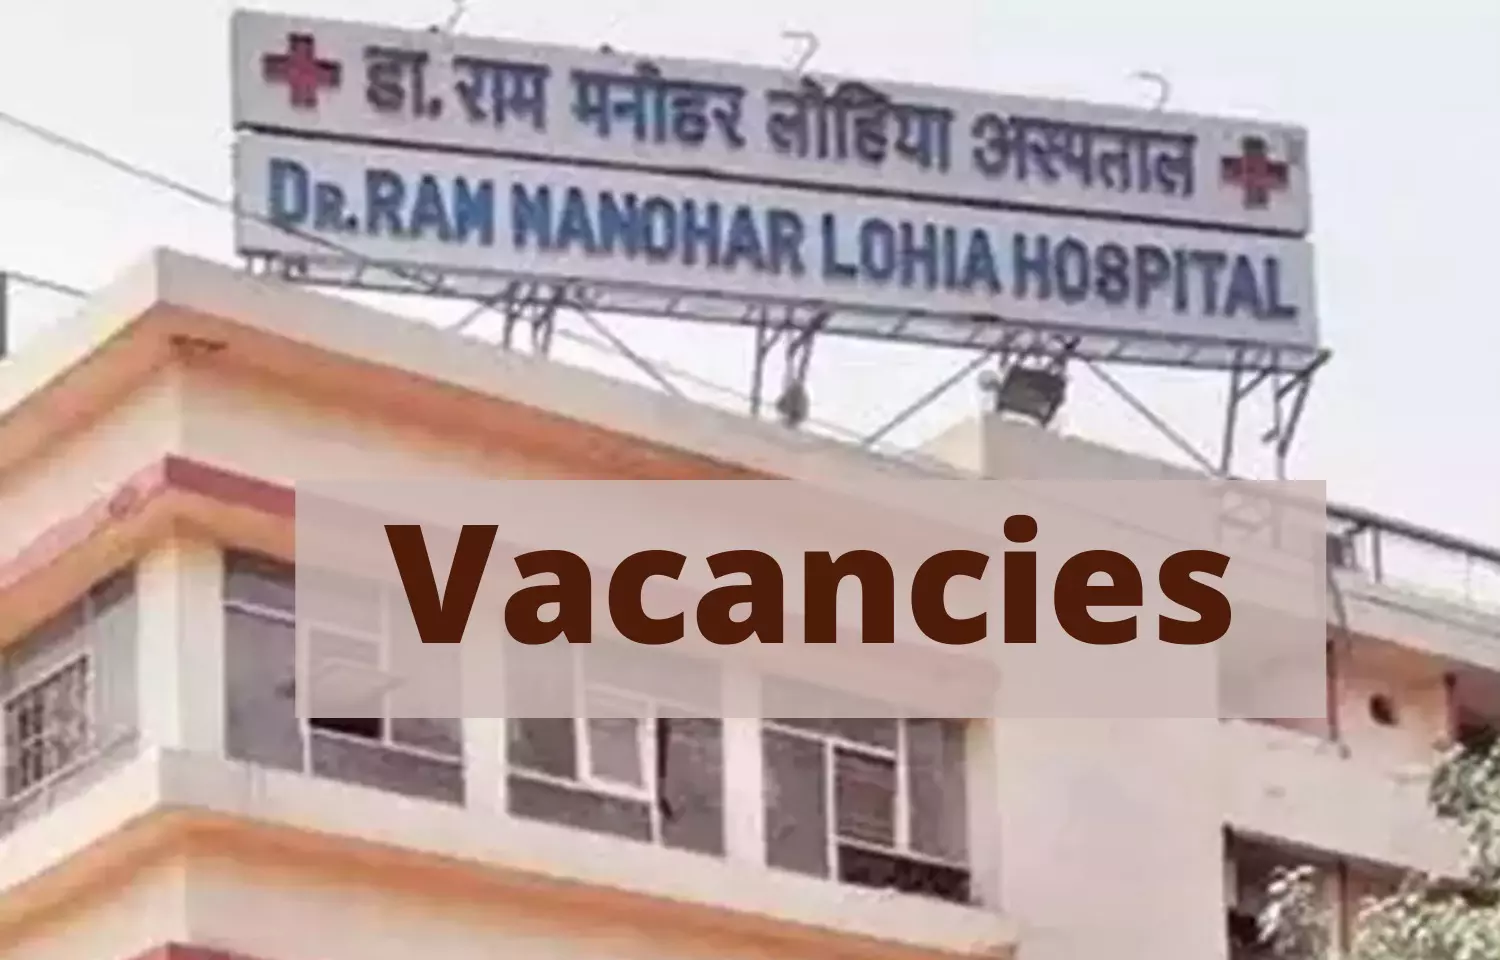 Apply Now At RML Hospital Delhi For 186 SR Vacancies In Various Specialities, Details